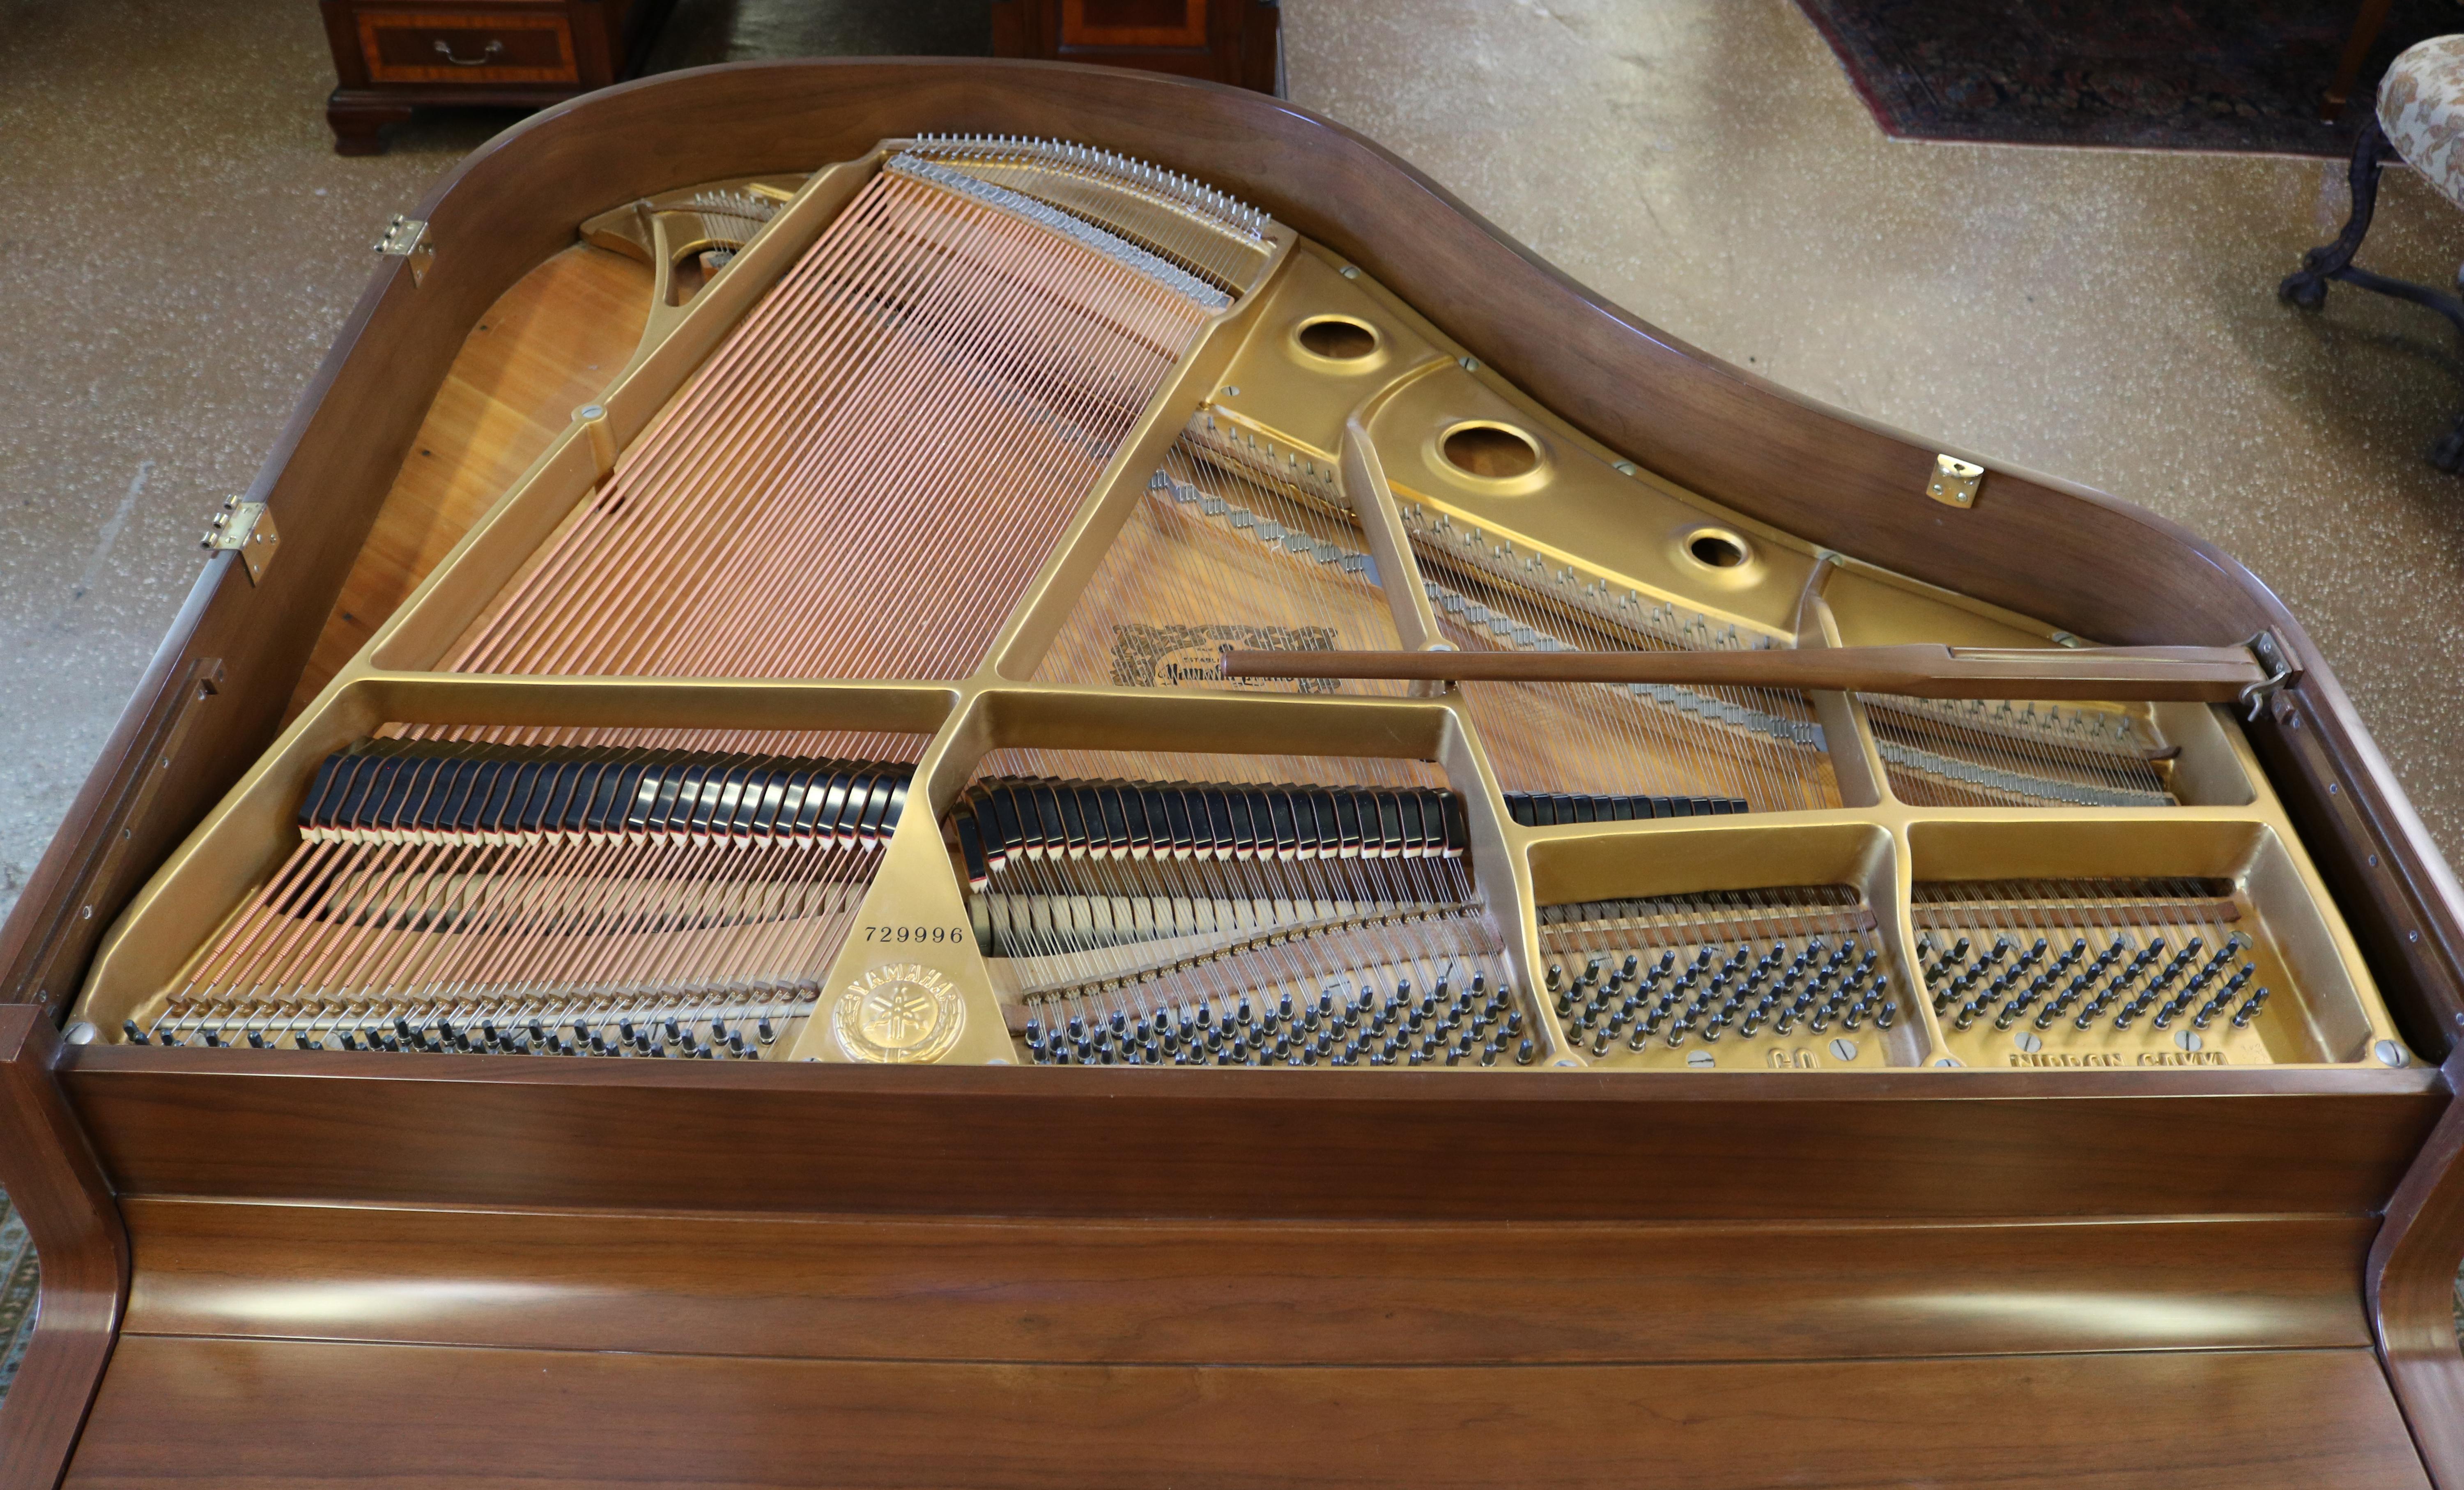 ​Gorgeous 1968 Walnut Yamaha G0 Baby Grand Piano Excellent Soundboard

Dimensions : 4'7